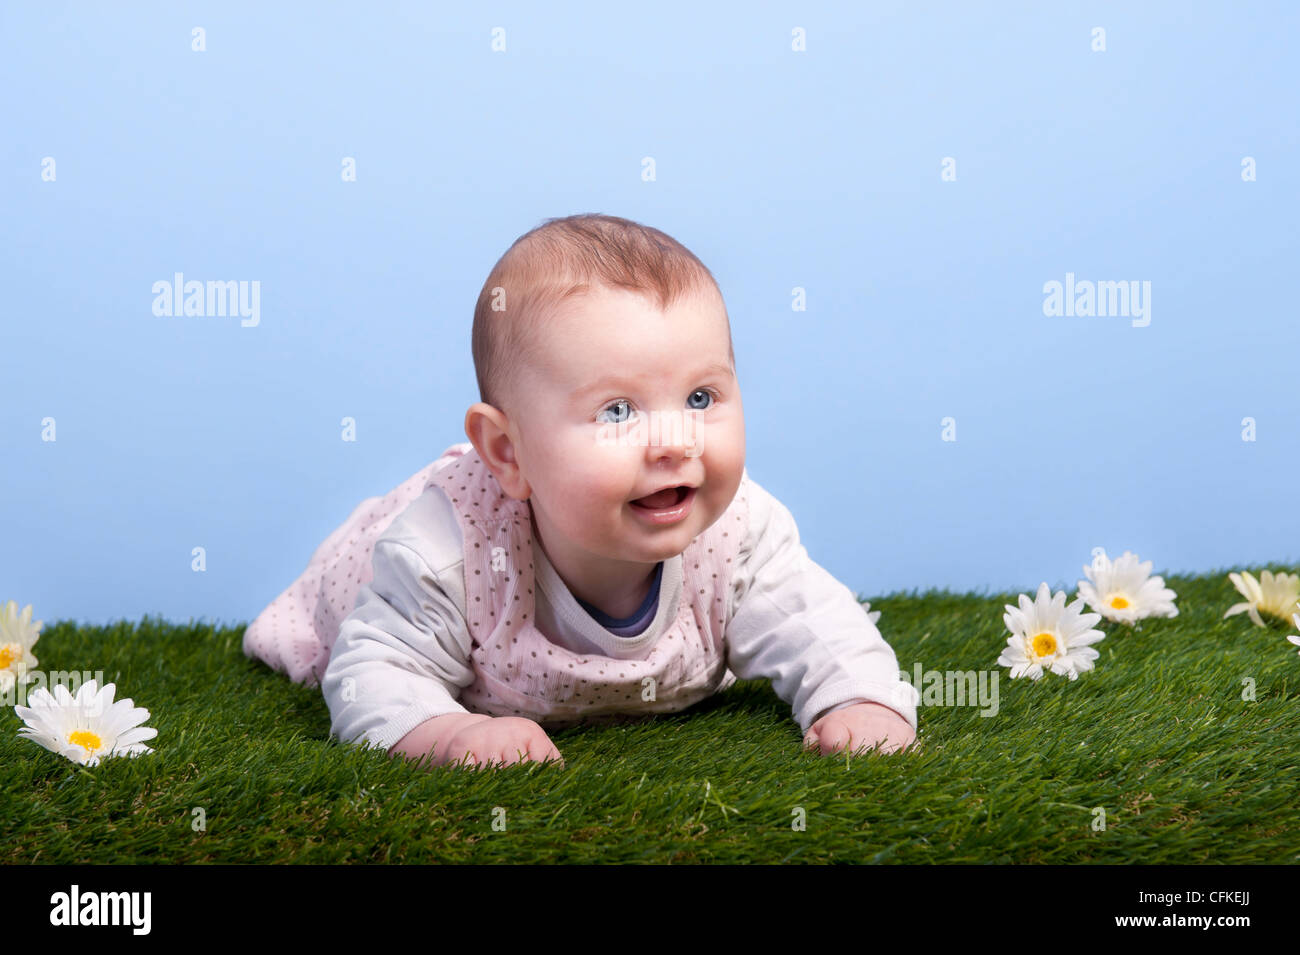 Baby lying on grass against a blue sky Banque D'Images